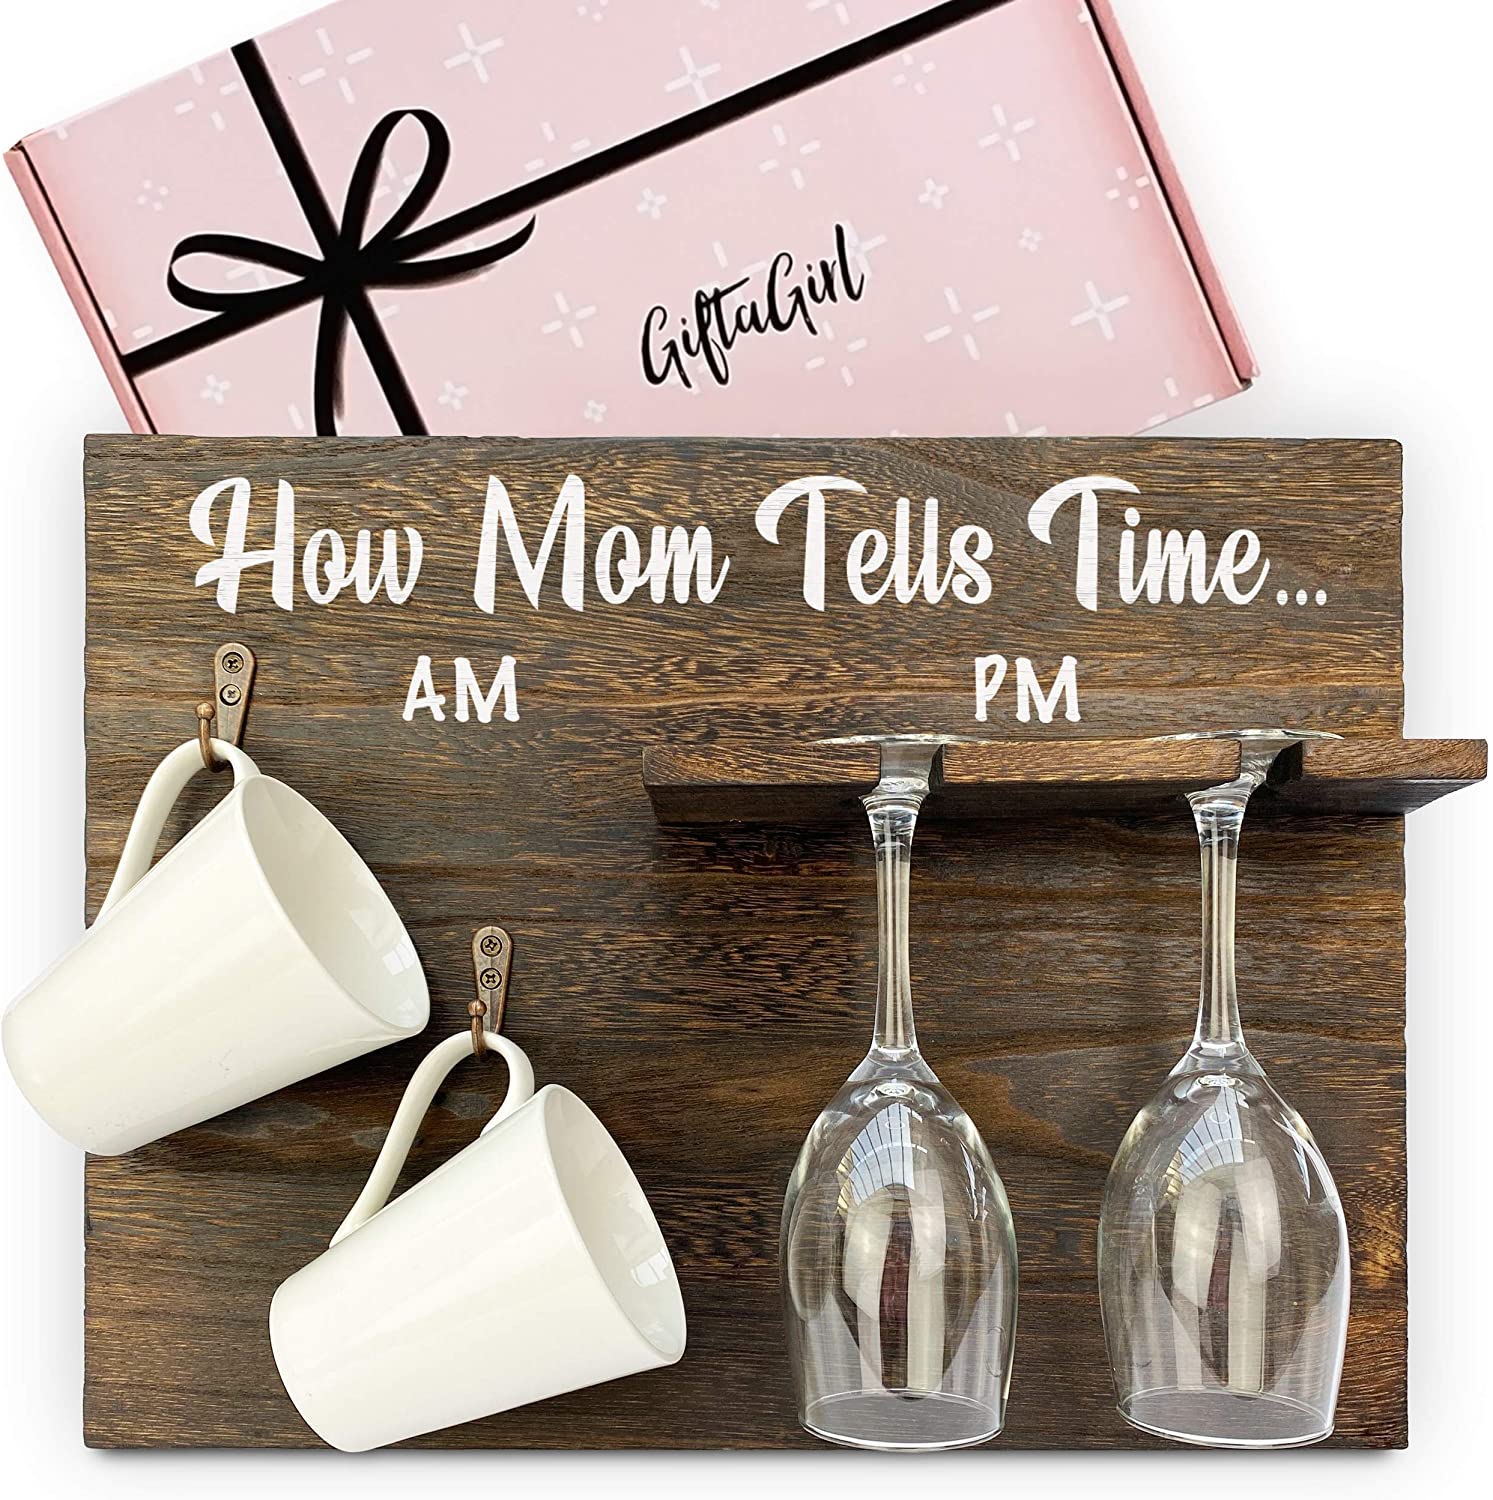 Very Popular Gifts for Mom or Birthday Gifts for Mom - Mom Gifts like this are a Little Cheeky, but are Fun Mom Birthday Gifts or Unique Gifts for Mom Who Has Everything. Mugs,Glasses Not Inc